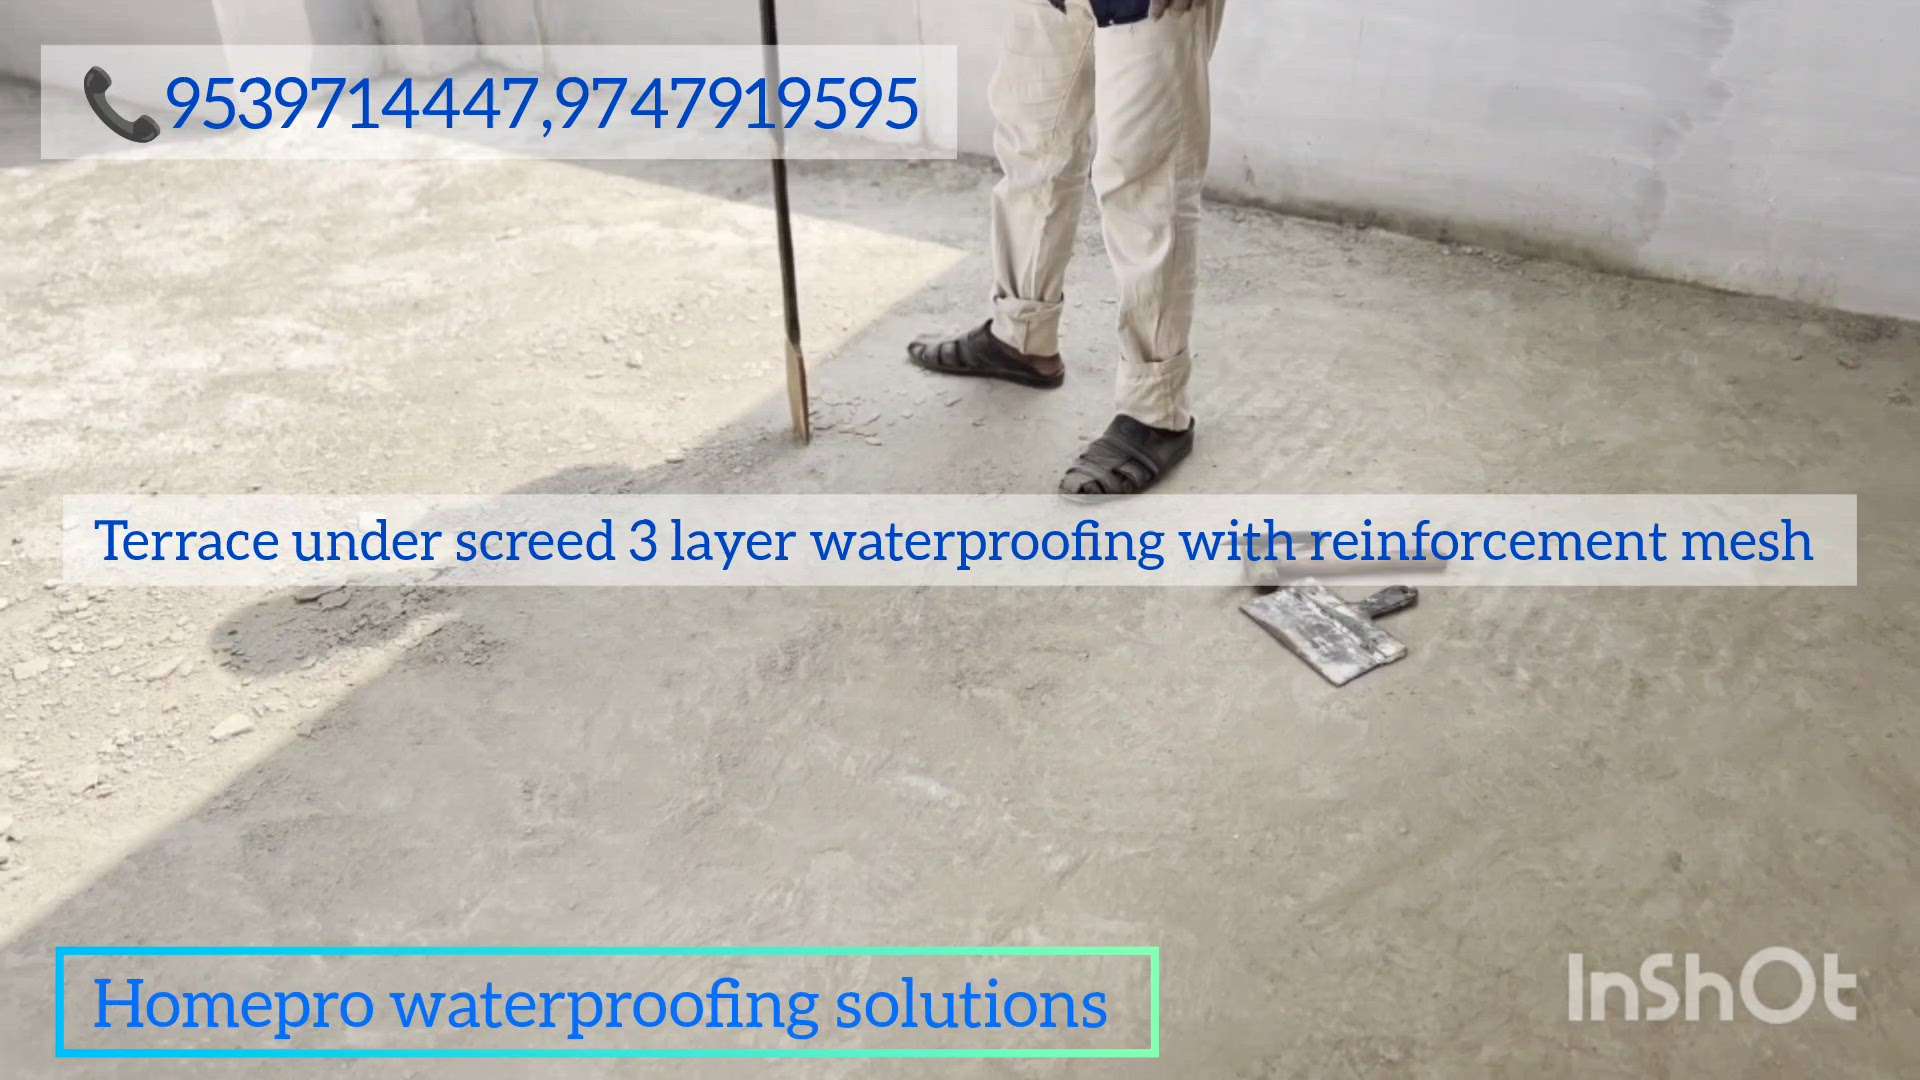 #Water proofing #Terrace under screed 3 Layer Water proofing